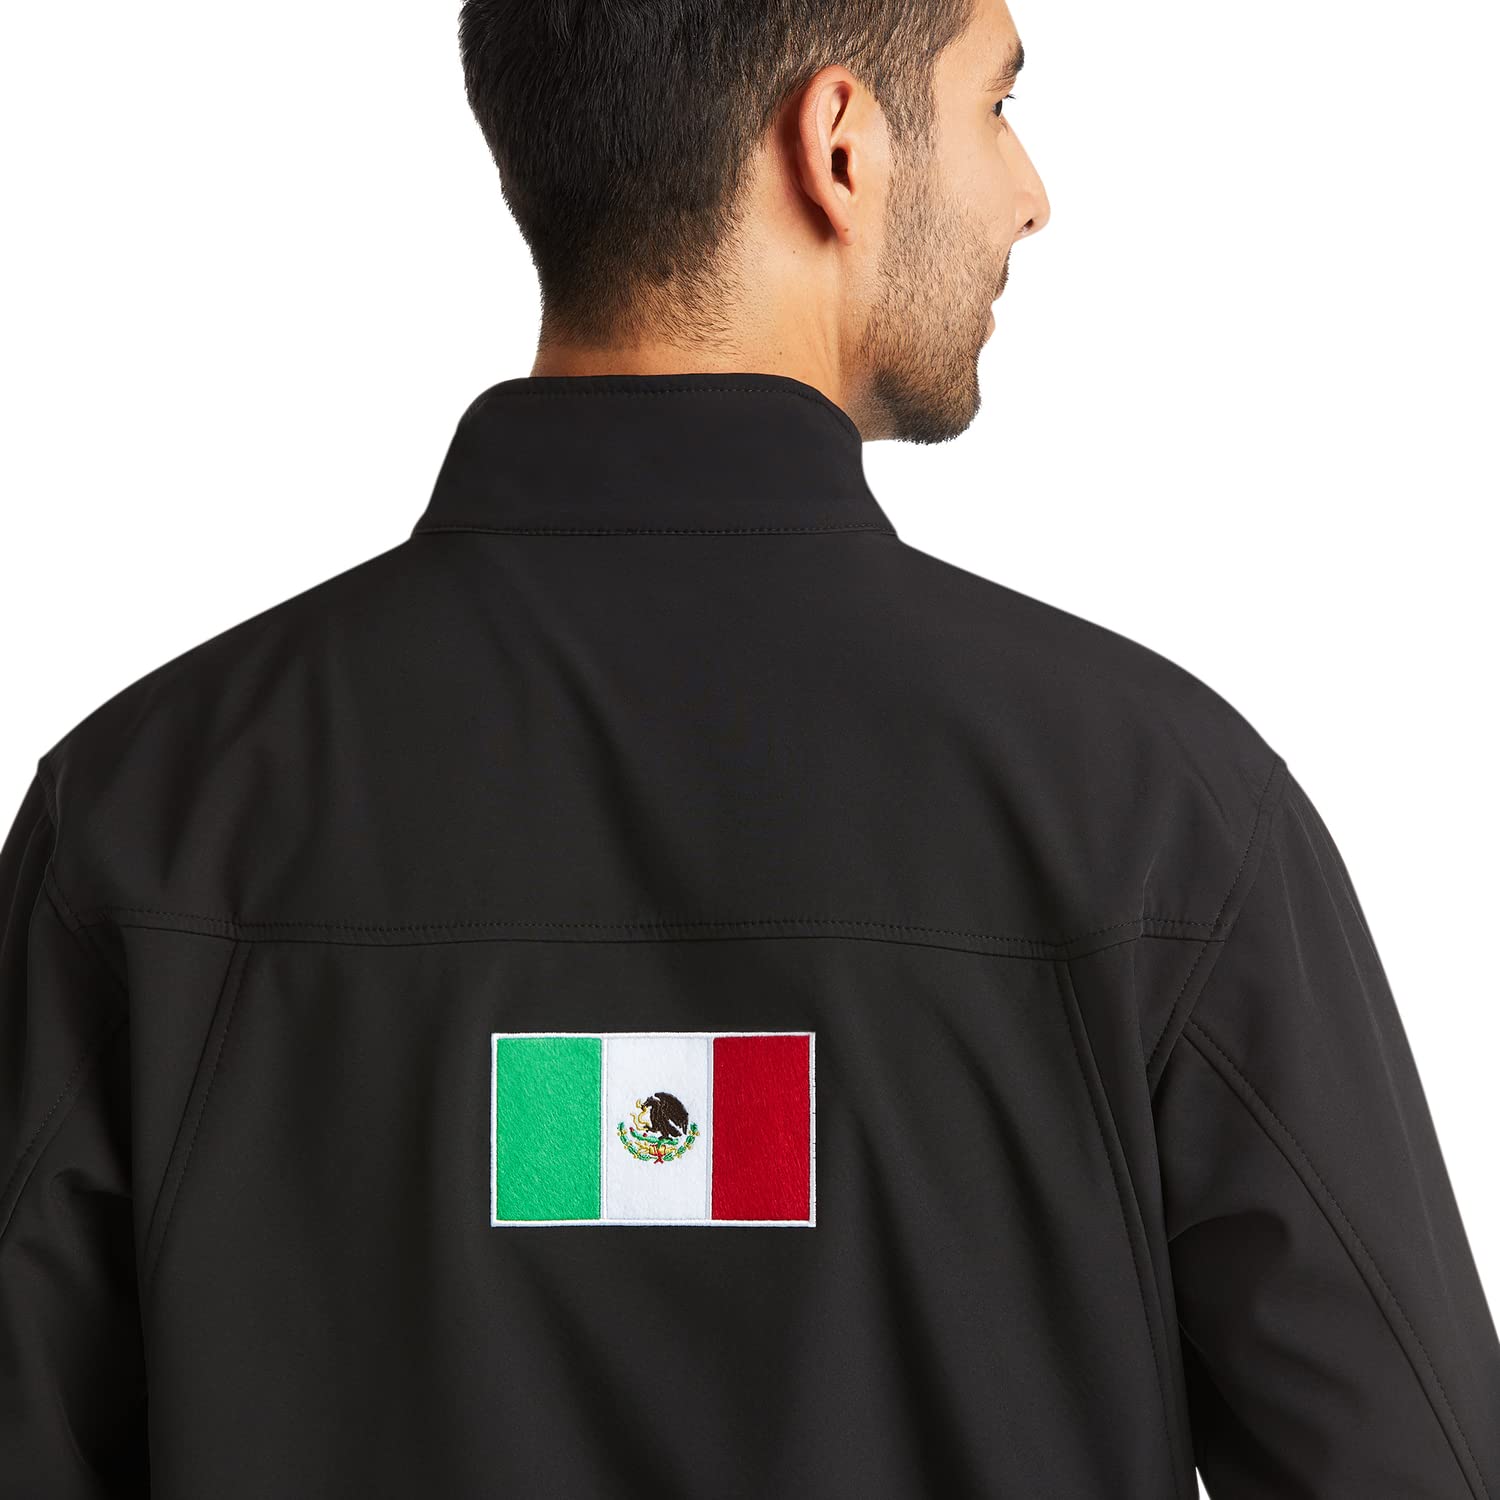 ARIAT Men's New Team Softshell Mexico Water Resistant Jacket